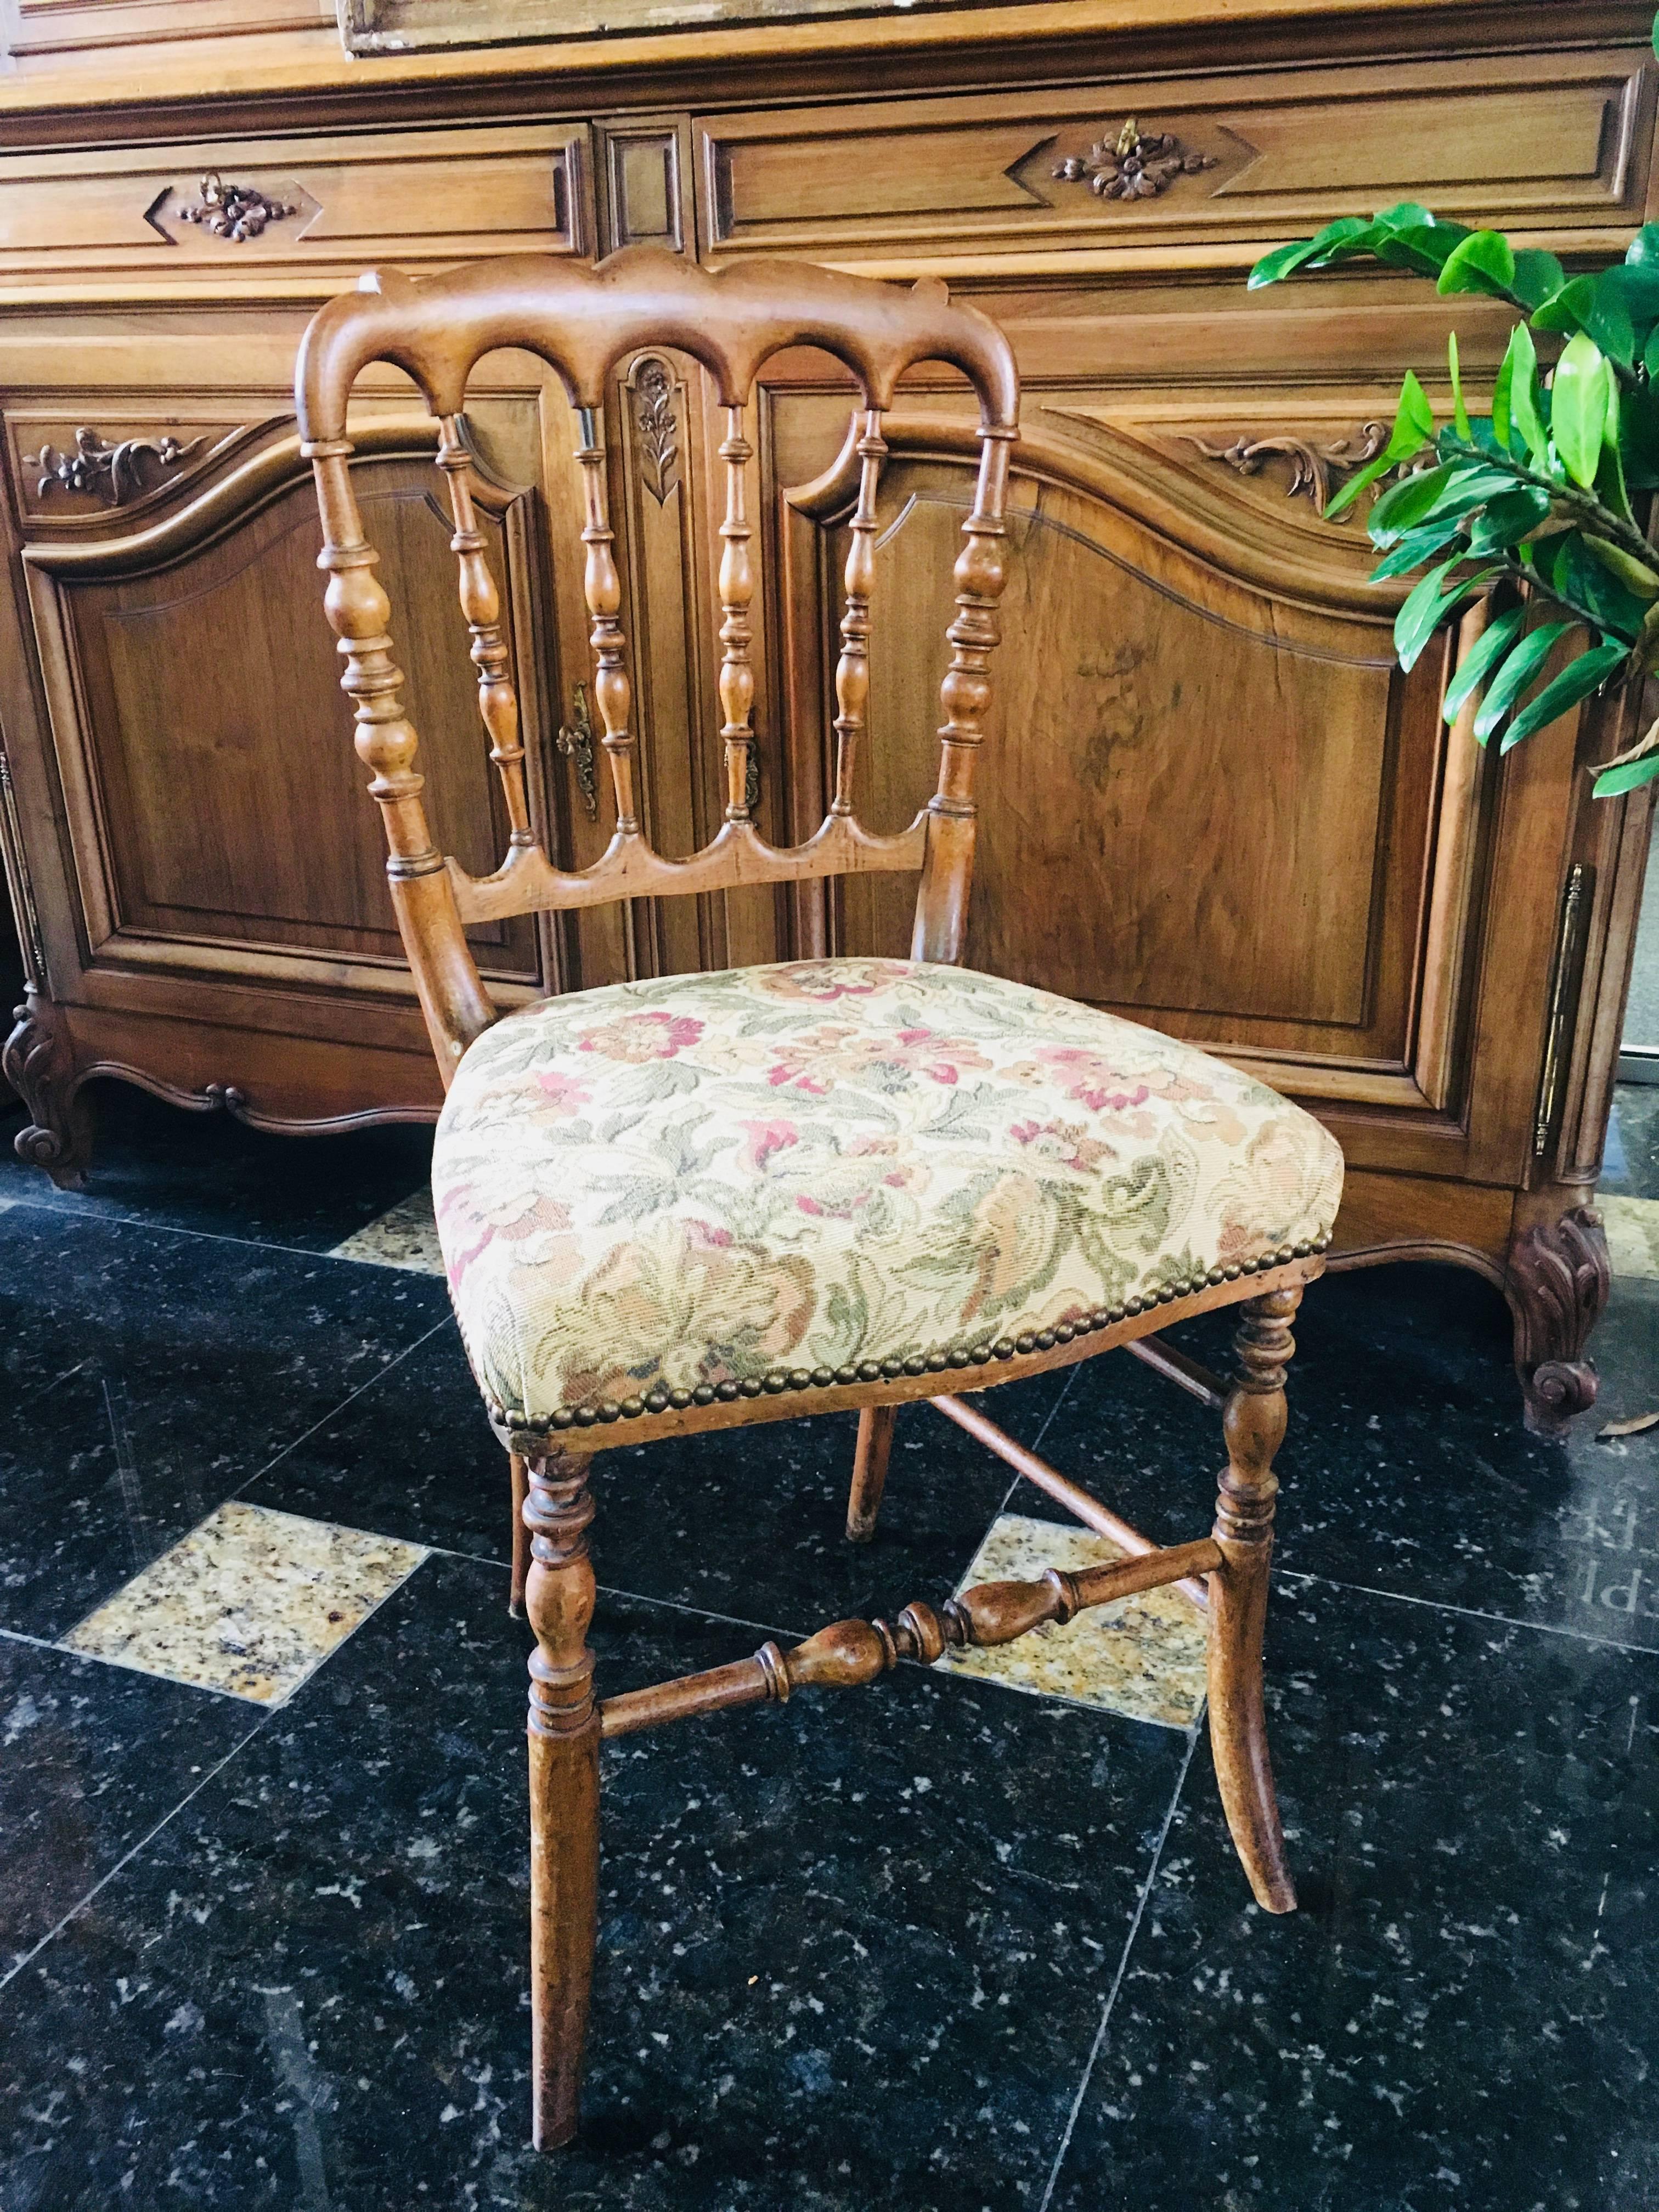 19th century pair of carved walnut chairs from France. Very stable and comfortable with floral upholstery,
circa 1860.